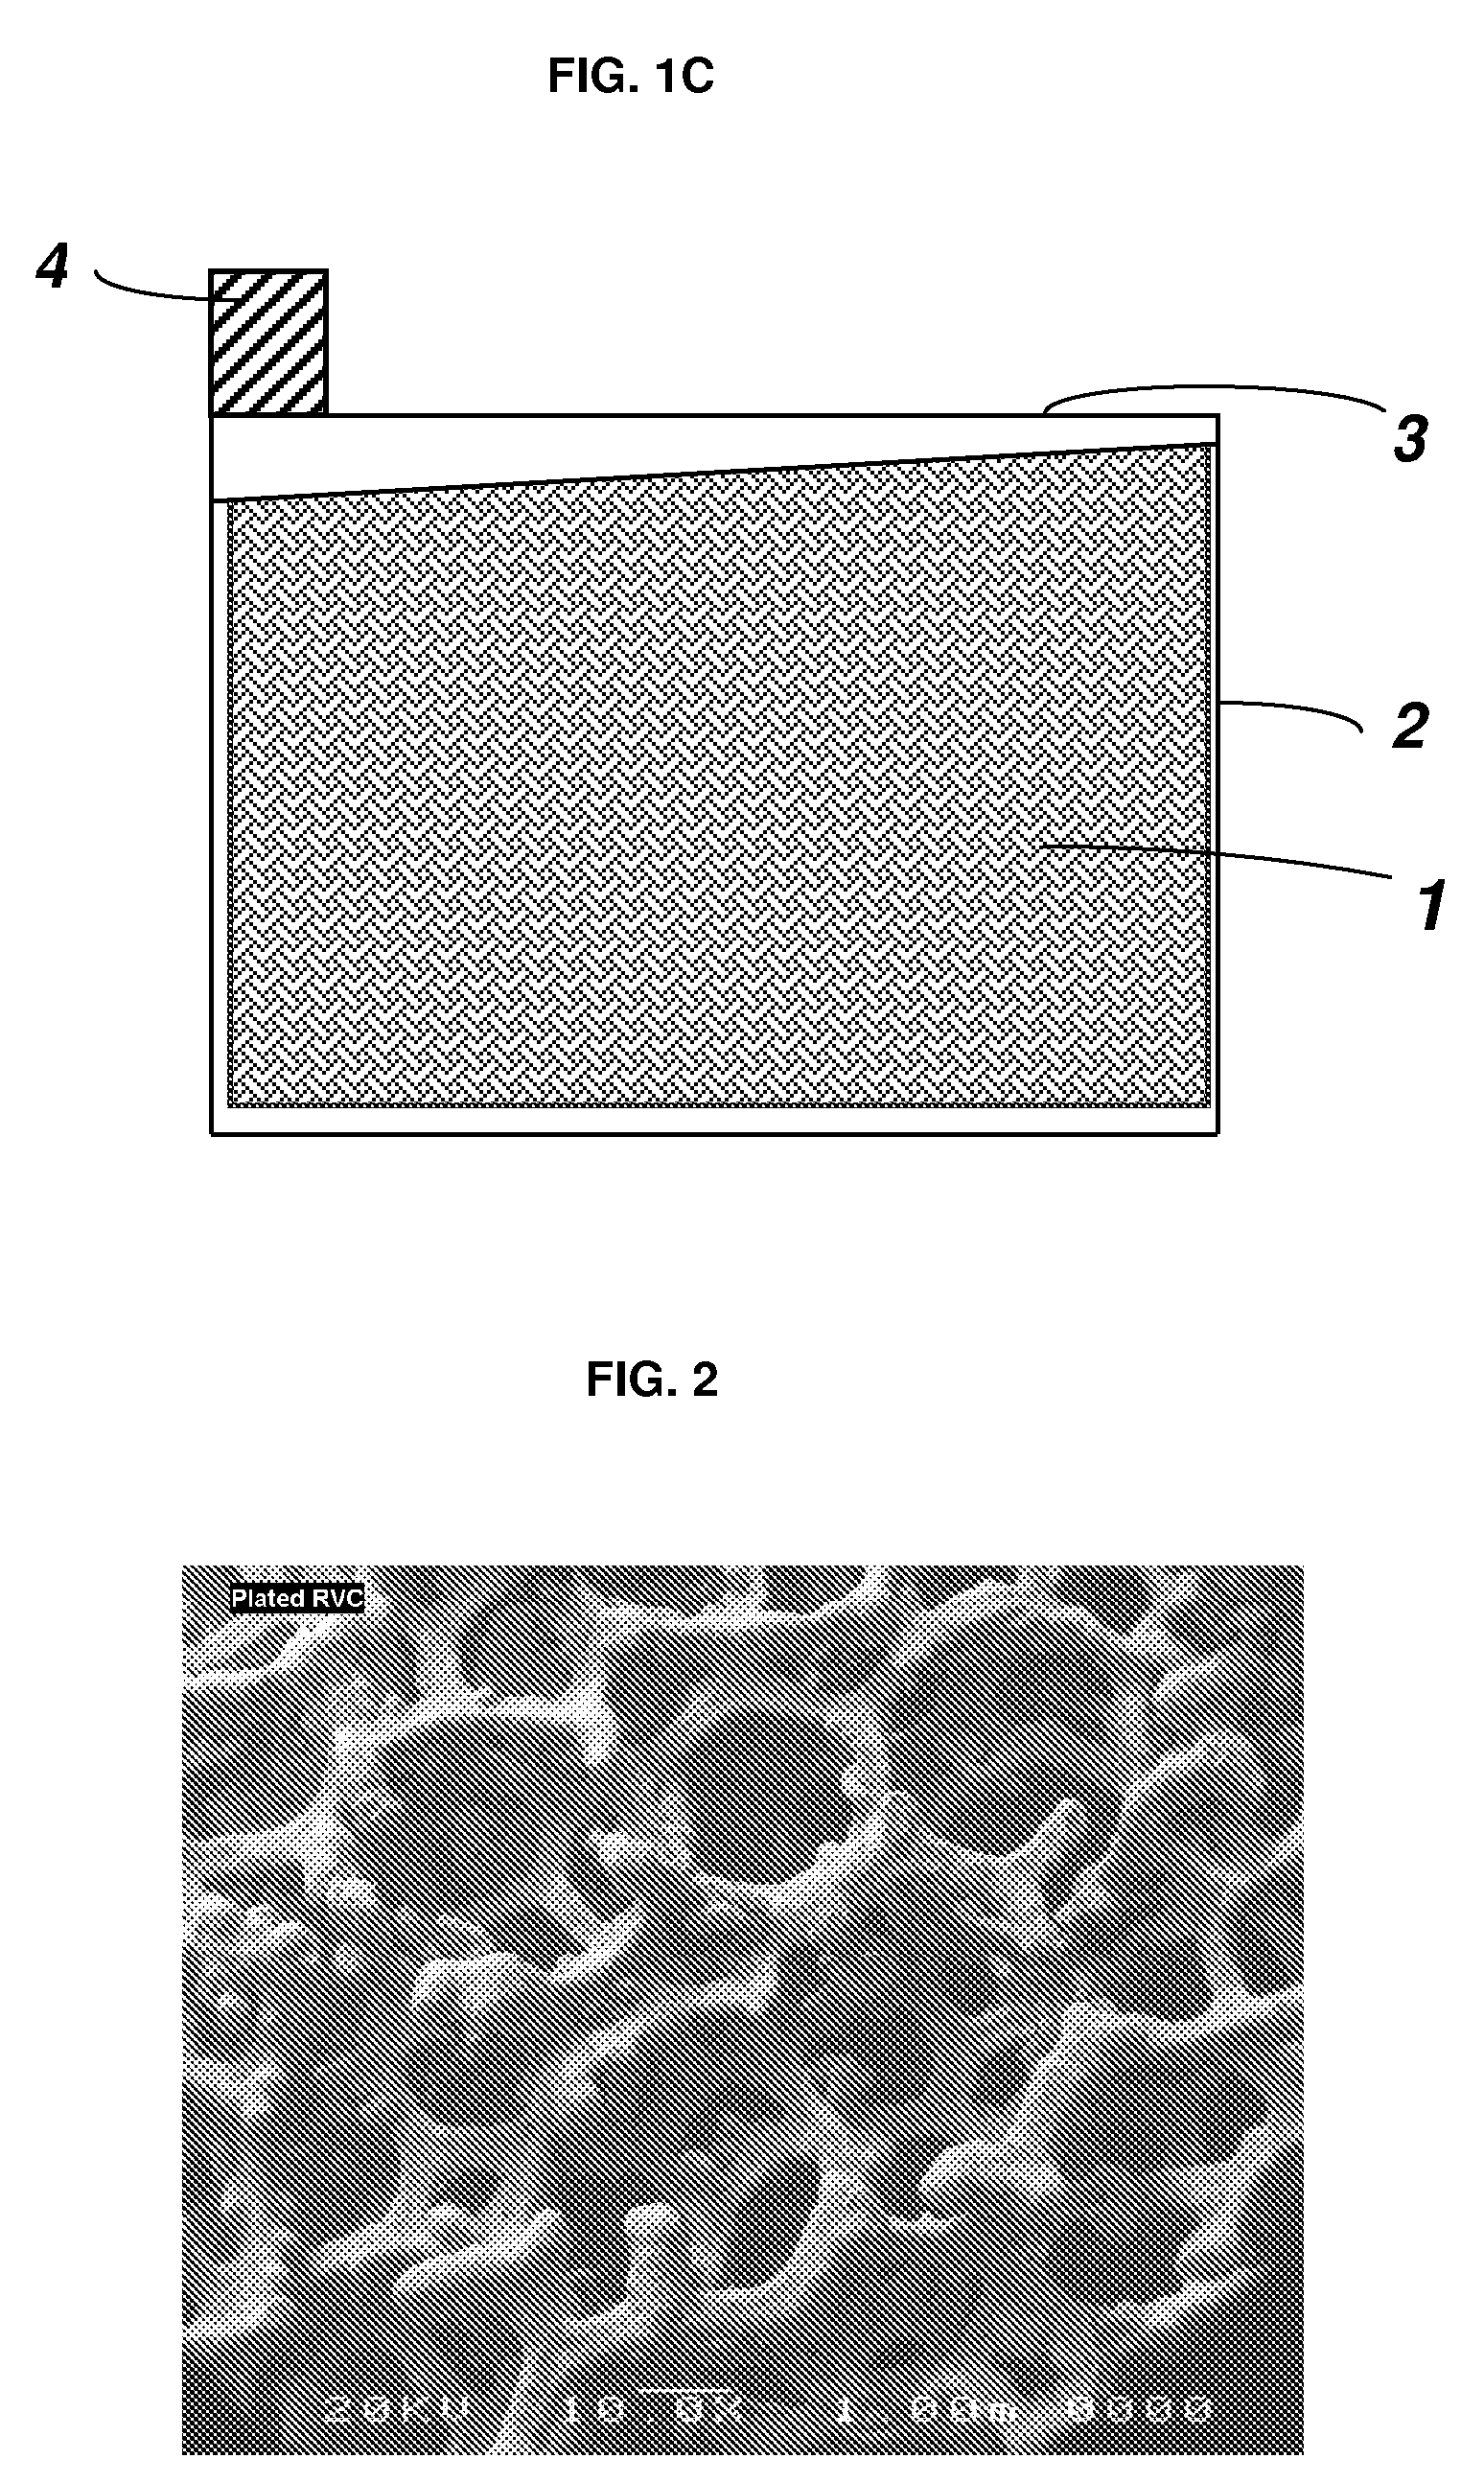 Current Collector Structure and Methods to Improve the Performance of a Lead-Acid Battery